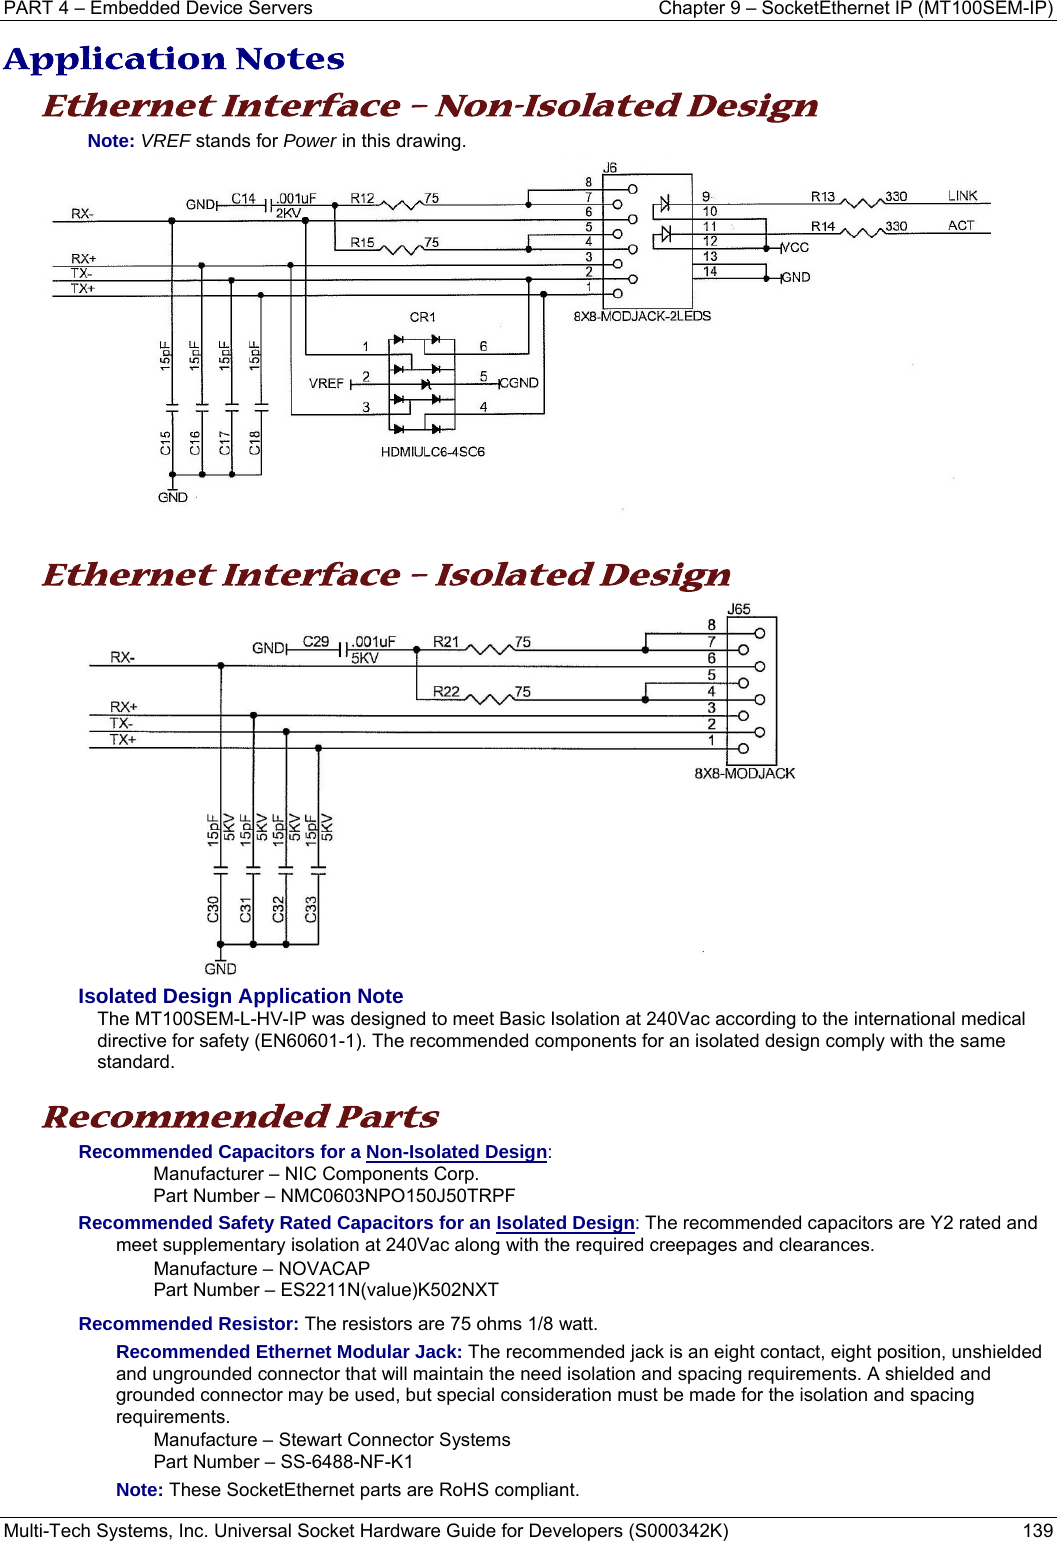 PART 4 – Embedded Device Servers  Chapter 9 – SocketEthernet IP (MT100SEM-IP)  Multi-Tech Systems, Inc. Universal Socket Hardware Guide for Developers (S000342K)  139  Application Notes Ethernet Interface – Non-Isolated Design Note: VREF stands for Power in this drawing.    Ethernet Interface – Isolated Design  Isolated Design Application Note The MT100SEM-L-HV-IP was designed to meet Basic Isolation at 240Vac according to the international medical directive for safety (EN60601-1). The recommended components for an isolated design comply with the same standard.   Recommended Parts  Recommended Capacitors for a Non-Isolated Design:  Manufacturer – NIC Components Corp.  Part Number – NMC0603NPO150J50TRPF Recommended Safety Rated Capacitors for an Isolated Design: The recommended capacitors are Y2 rated and meet supplementary isolation at 240Vac along with the required creepages and clearances. Manufacture – NOVACAP Part Number – ES2211N(value)K502NXT  Recommended Resistor: The resistors are 75 ohms 1/8 watt. Recommended Ethernet Modular Jack: The recommended jack is an eight contact, eight position, unshielded and ungrounded connector that will maintain the need isolation and spacing requirements. A shielded and grounded connector may be used, but special consideration must be made for the isolation and spacing requirements.  Manufacture – Stewart Connector Systems Part Number – SS-6488-NF-K1 Note: These SocketEthernet parts are RoHS compliant.   